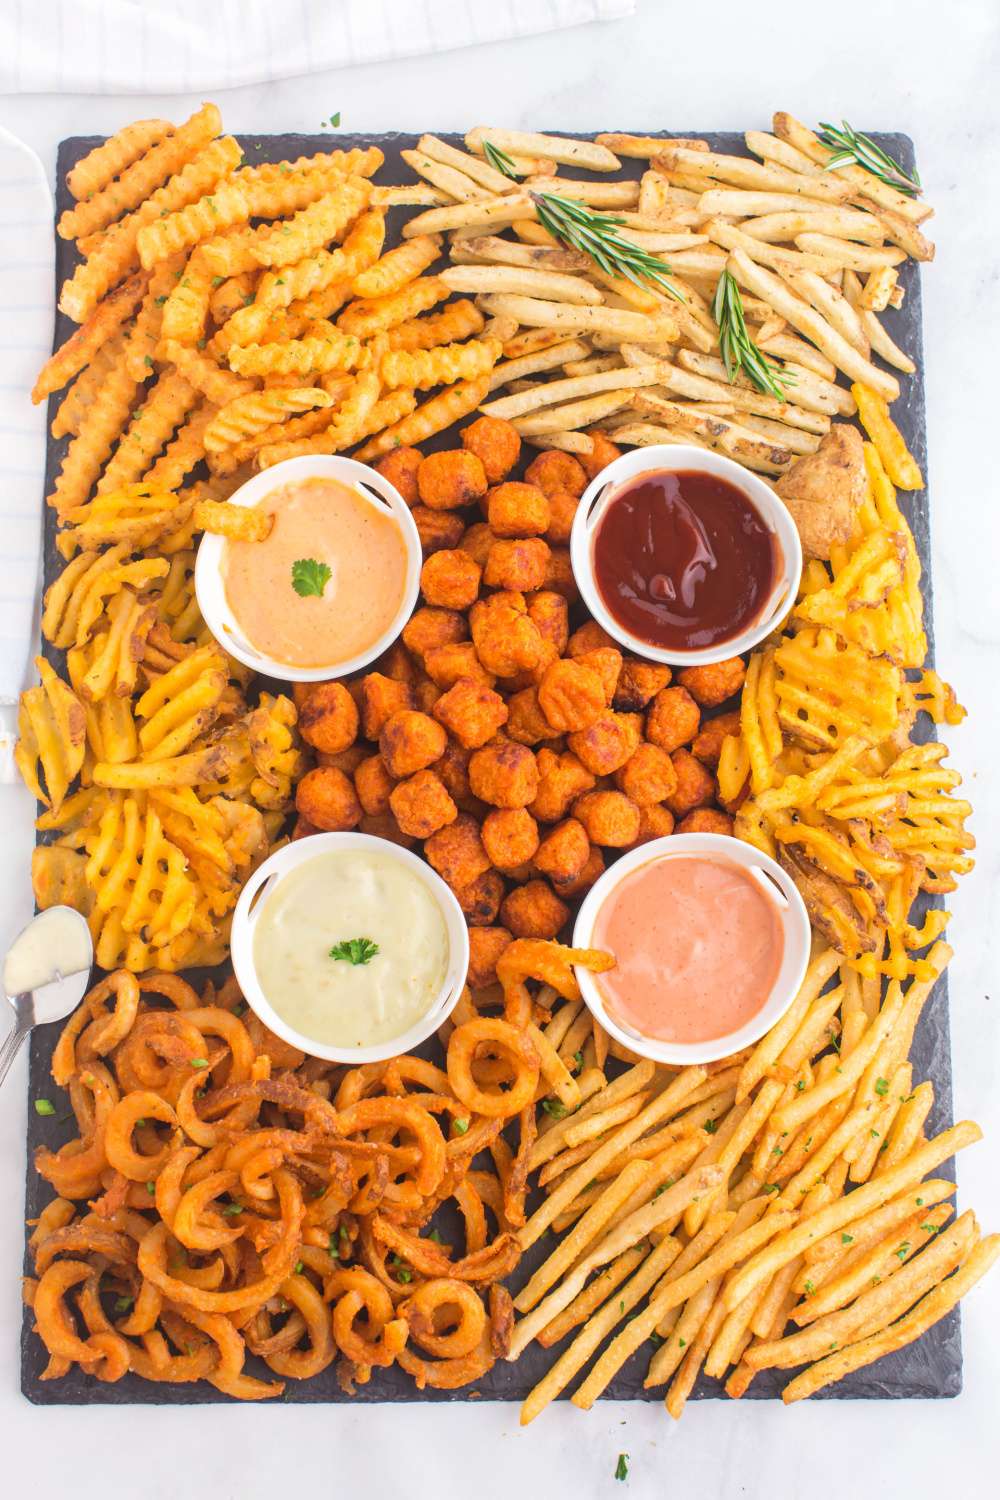 This French Fry Appetizer Board is so fun and you can make it however you wish! Pick your favorite fries, tots, or onion rings to add your own spin on it. via @familyfresh